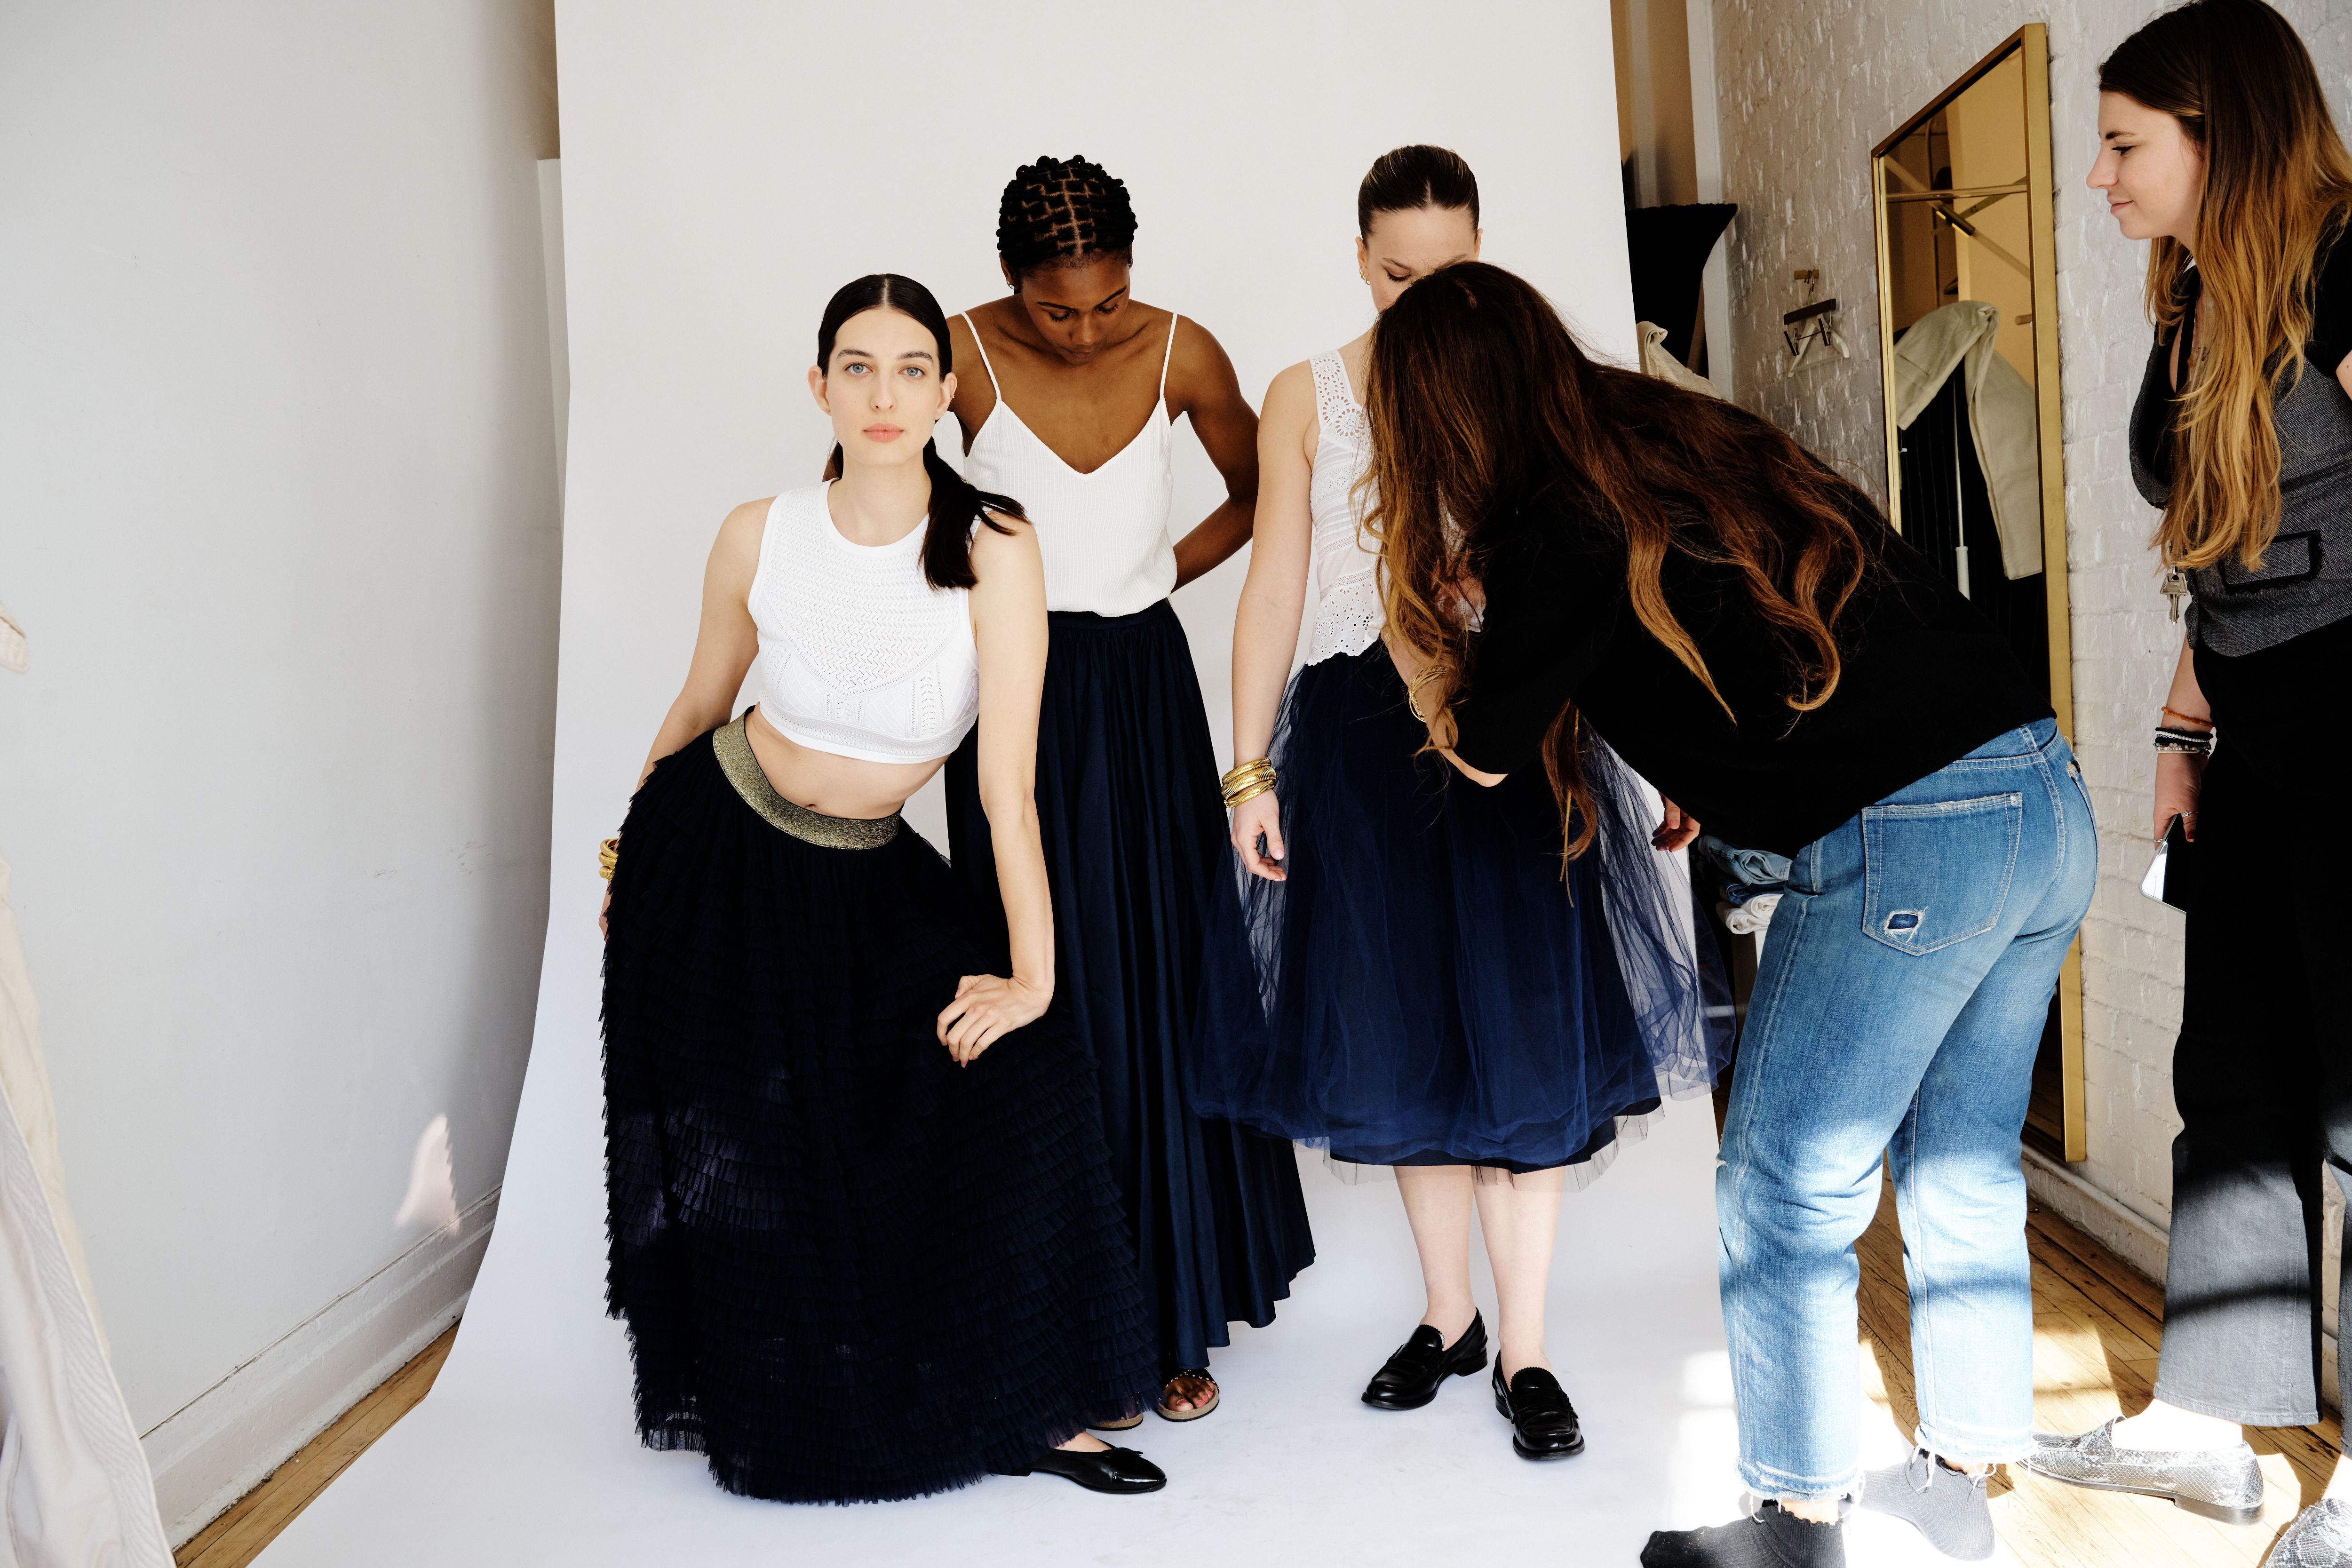 Eva Dayton, founder of Consignment Brooklyn, styling models for shoot